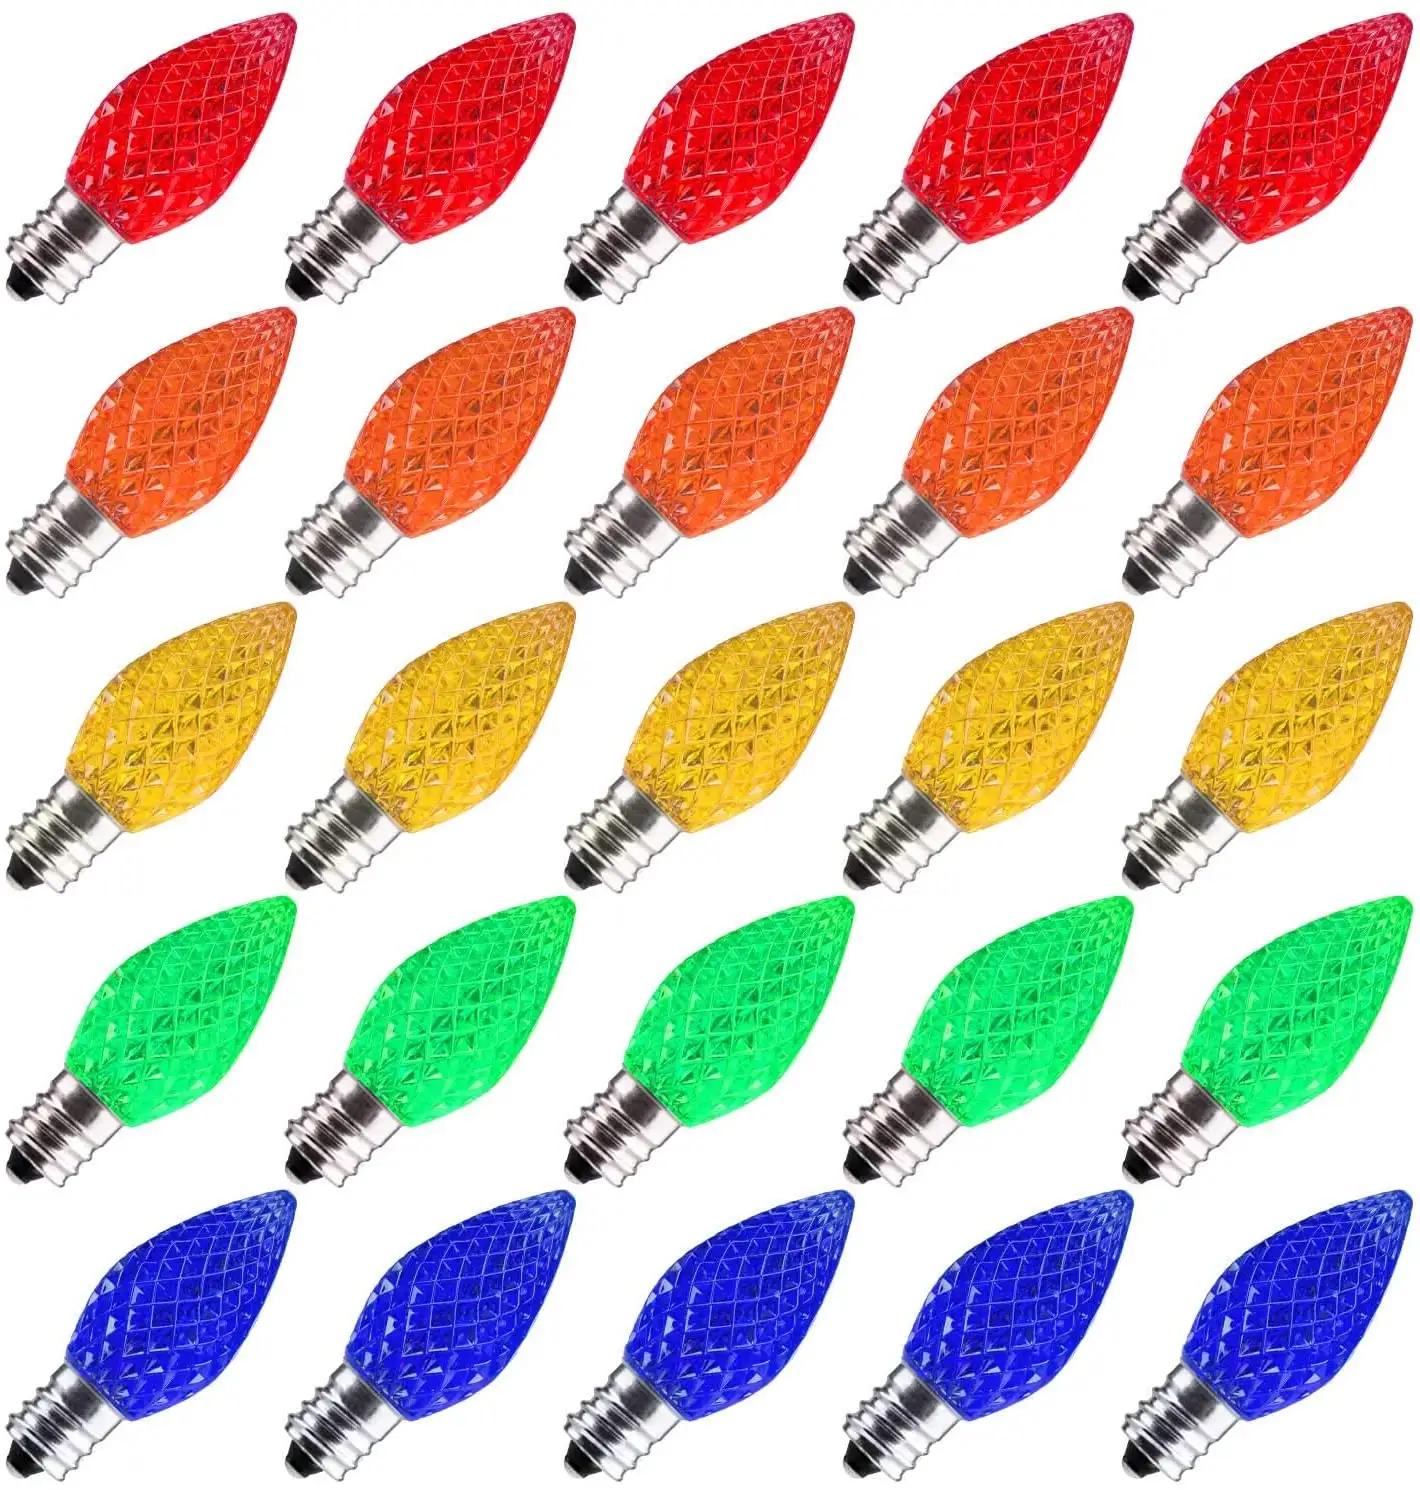 Commercial Grade C7 Multi Replacement Christmas Light E12 Faceted LED Bulbs